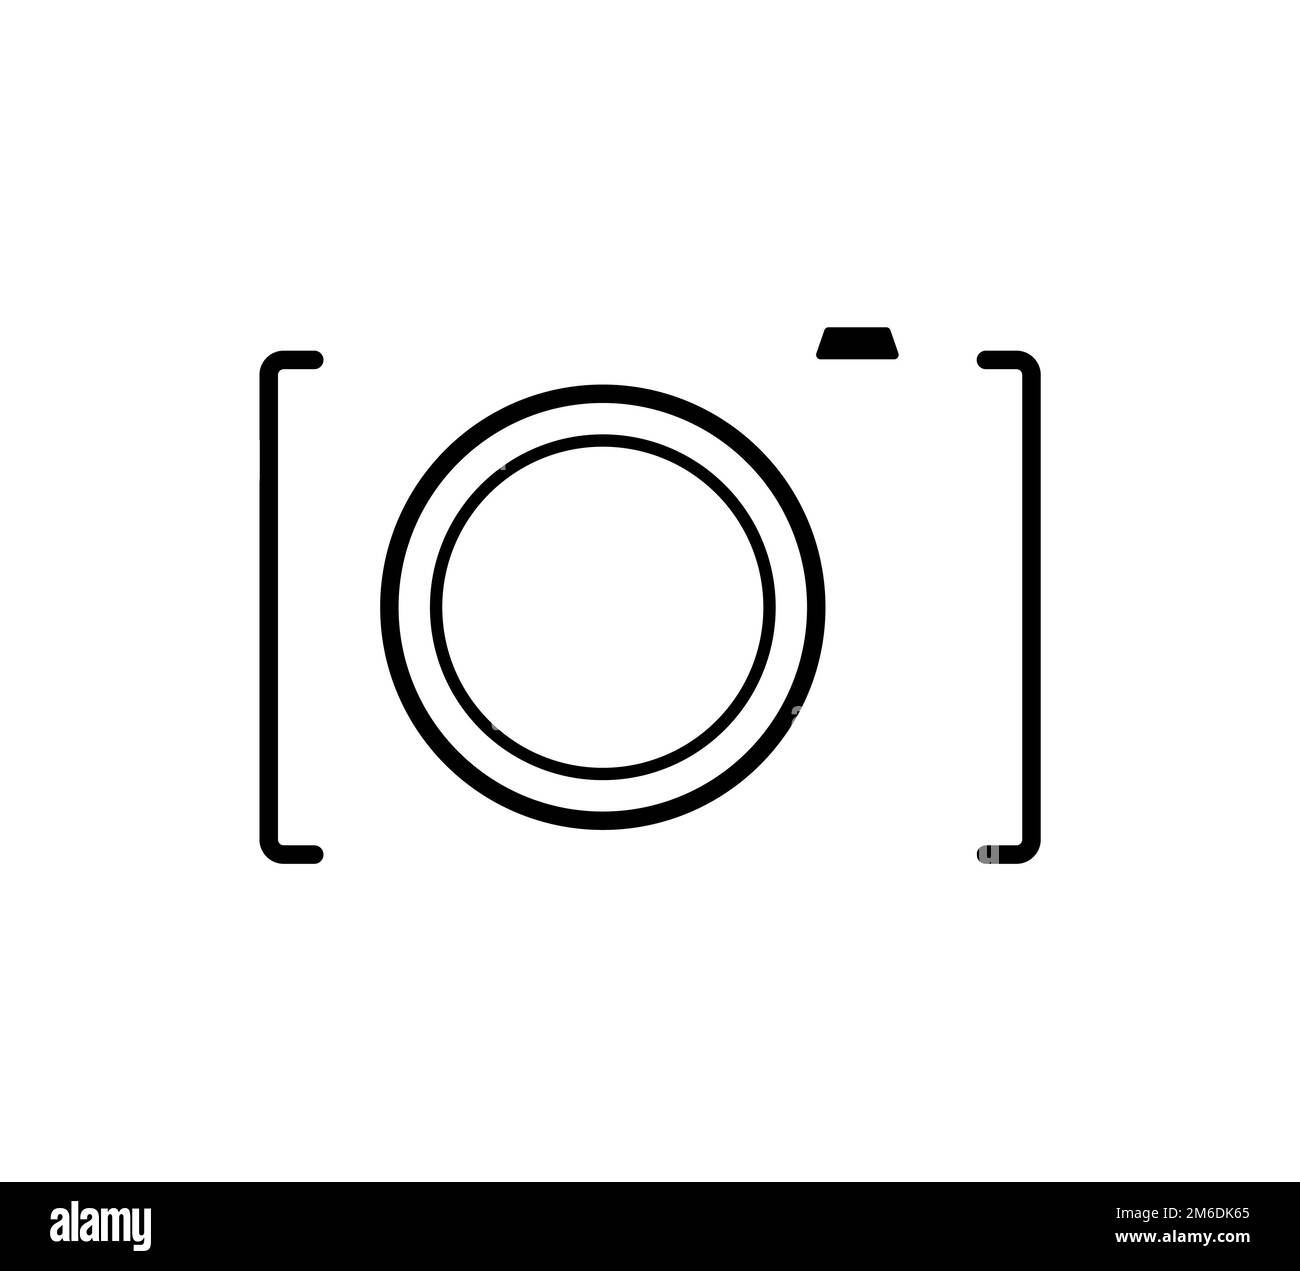 Camera icon in linear style. Photography element. Icon for web or applications. Stock Photo